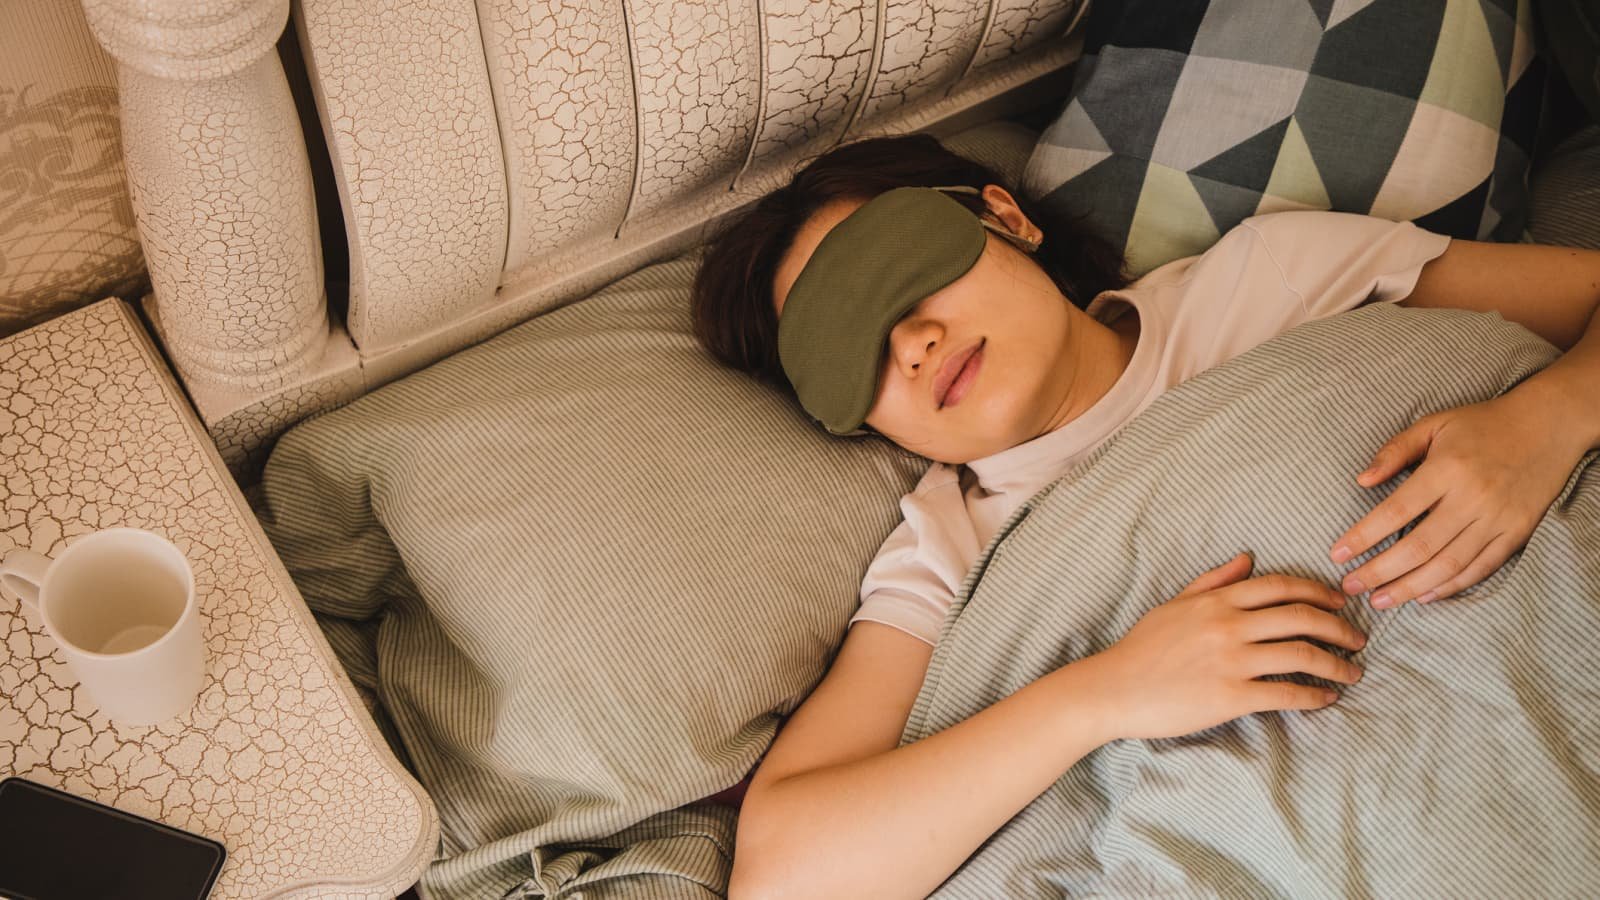 Which Sleep Aid Is Best For Night Workers